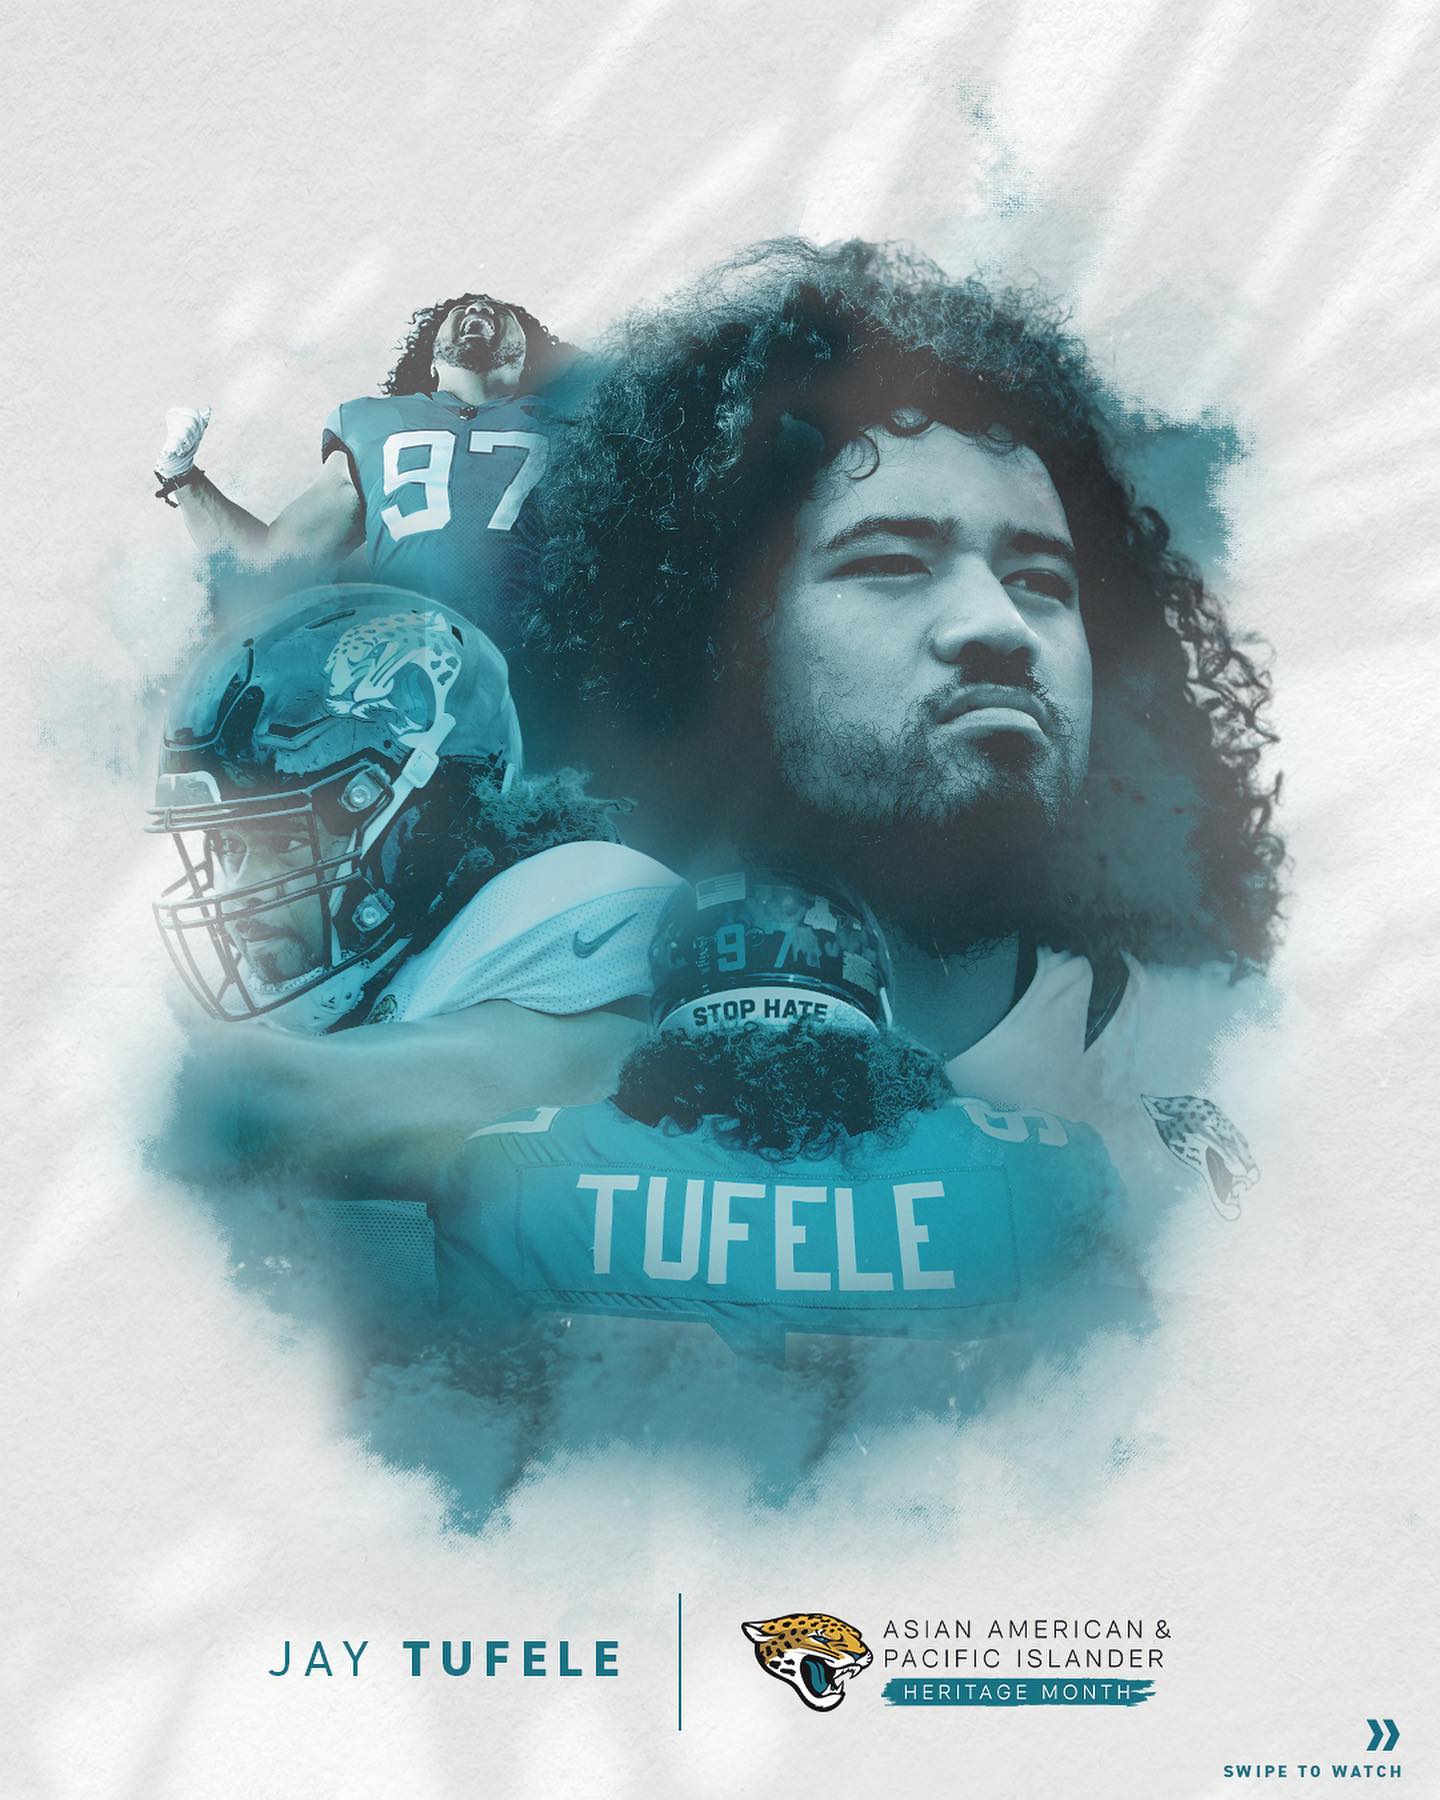 𝙈𝙤𝙧𝙚 𝙩𝙝𝙖𝙣 𝙖 𝙣𝙖𝙢𝙚.  @jay_tufele shares his experience as an American Samoan in ...